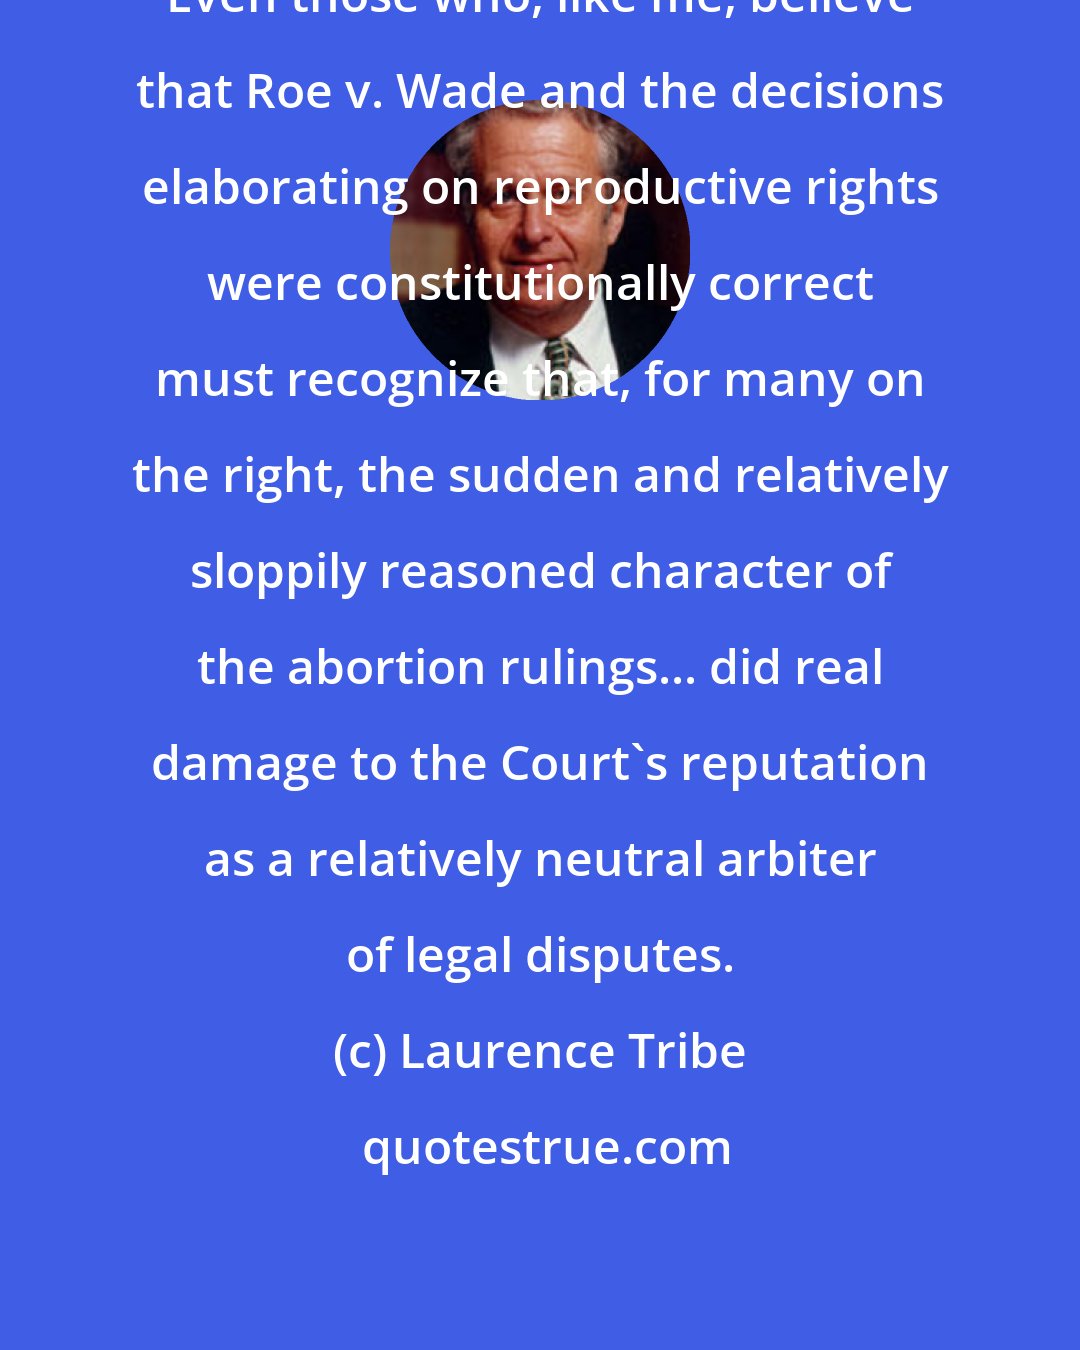 Laurence Tribe: Even those who, like me, believe that Roe v. Wade and the decisions elaborating on reproductive rights were constitutionally correct must recognize that, for many on the right, the sudden and relatively sloppily reasoned character of the abortion rulings... did real damage to the Court's reputation as a relatively neutral arbiter of legal disputes.